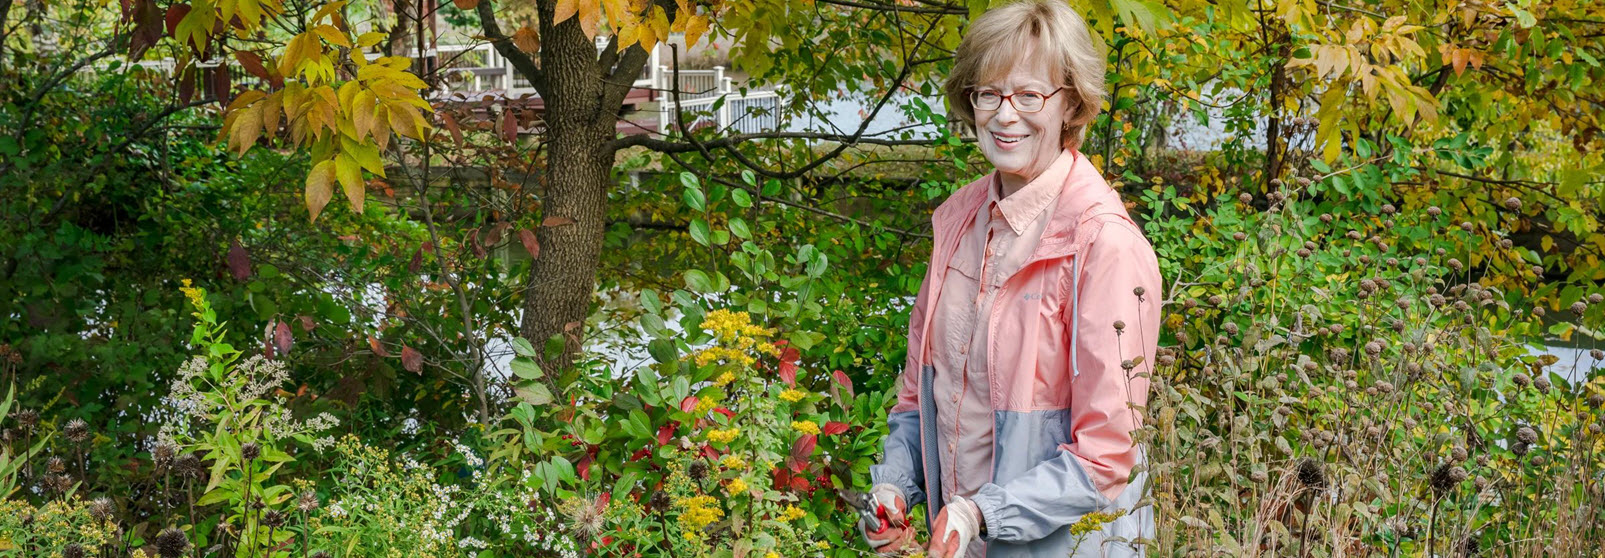 woman in pink jacket stands in wooded garden wearing gardening gloves to prune the bushes and flowers